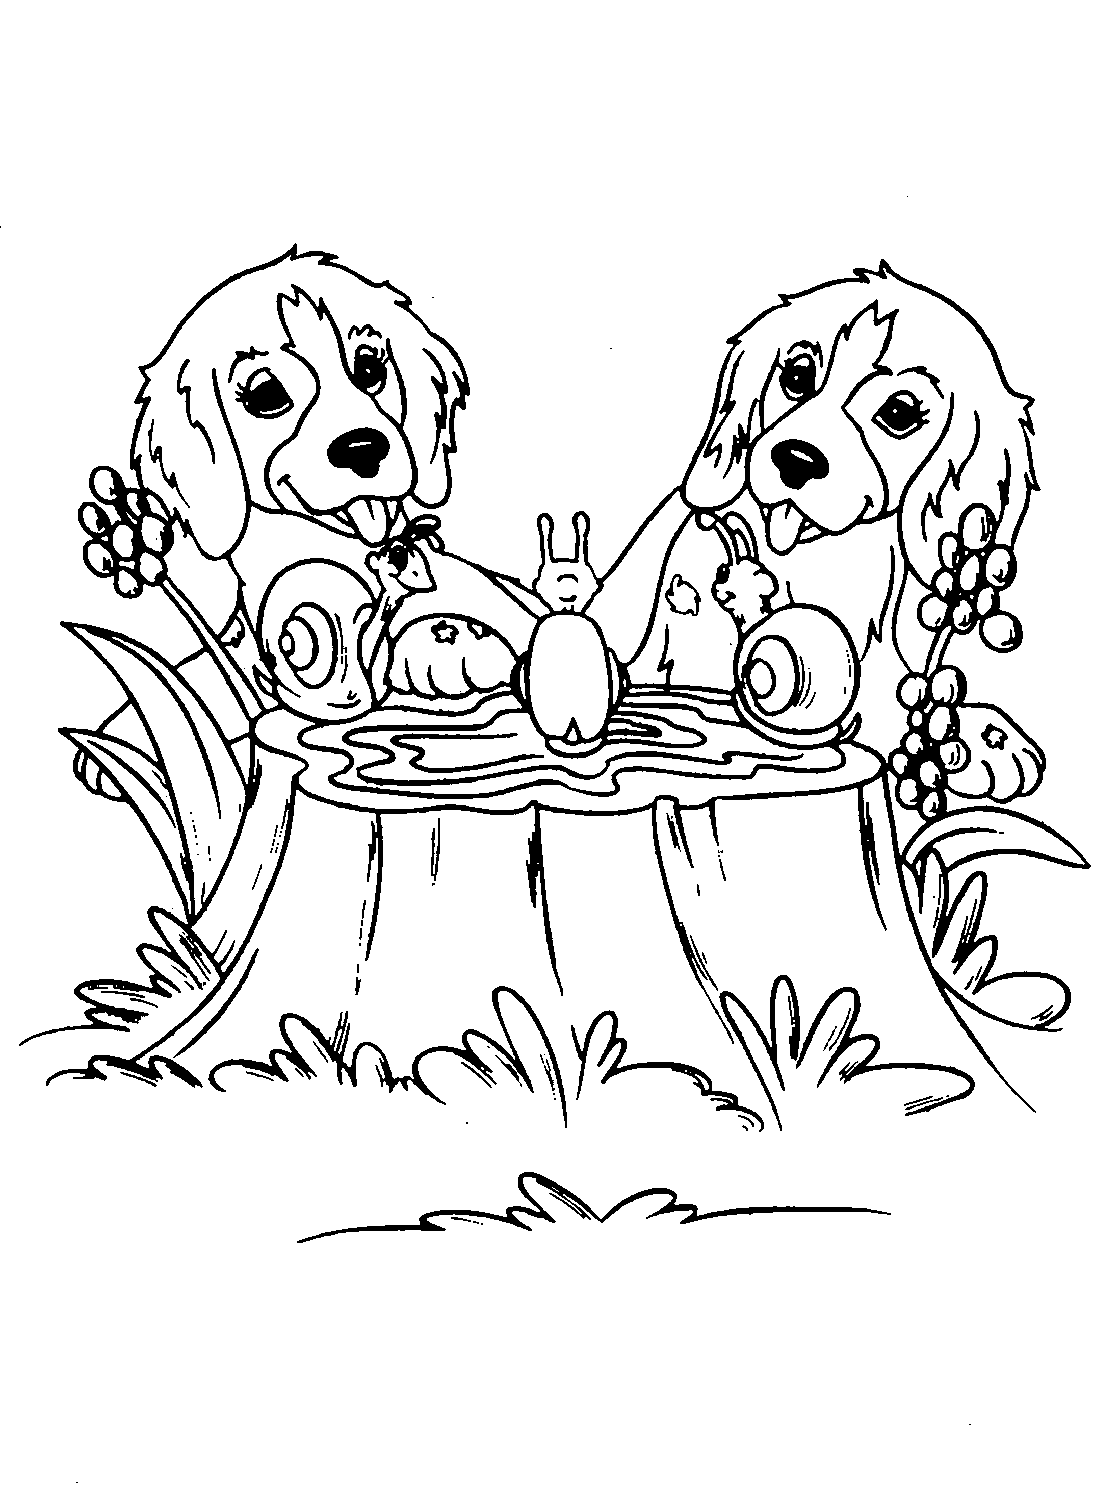 Coloring Pages: Dogs Coloring Pages Free and Printable